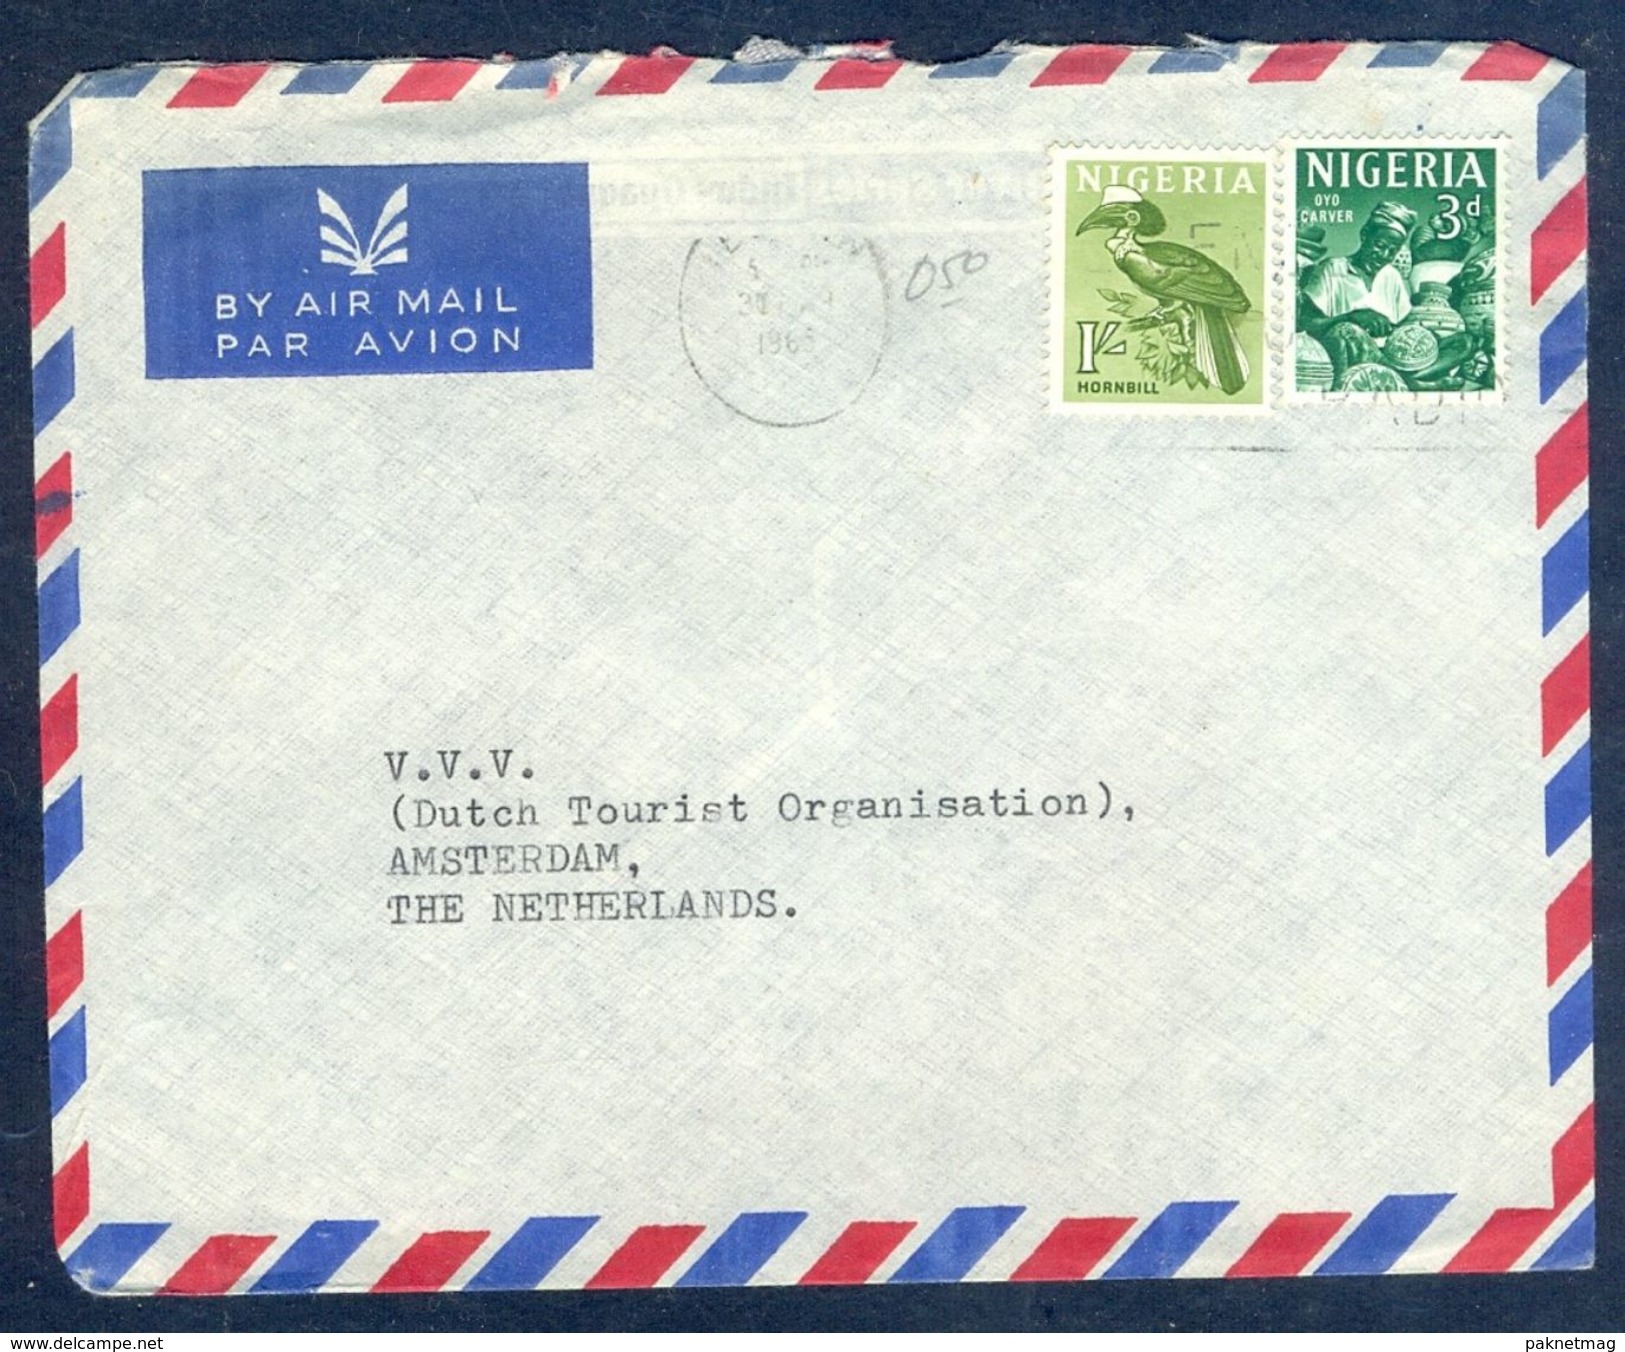 G70- Postal Used Cover. Posted From Nigeria To Netherlands. Birds. Hornbill. Oyo Carver. - Nigeria (1961-...)